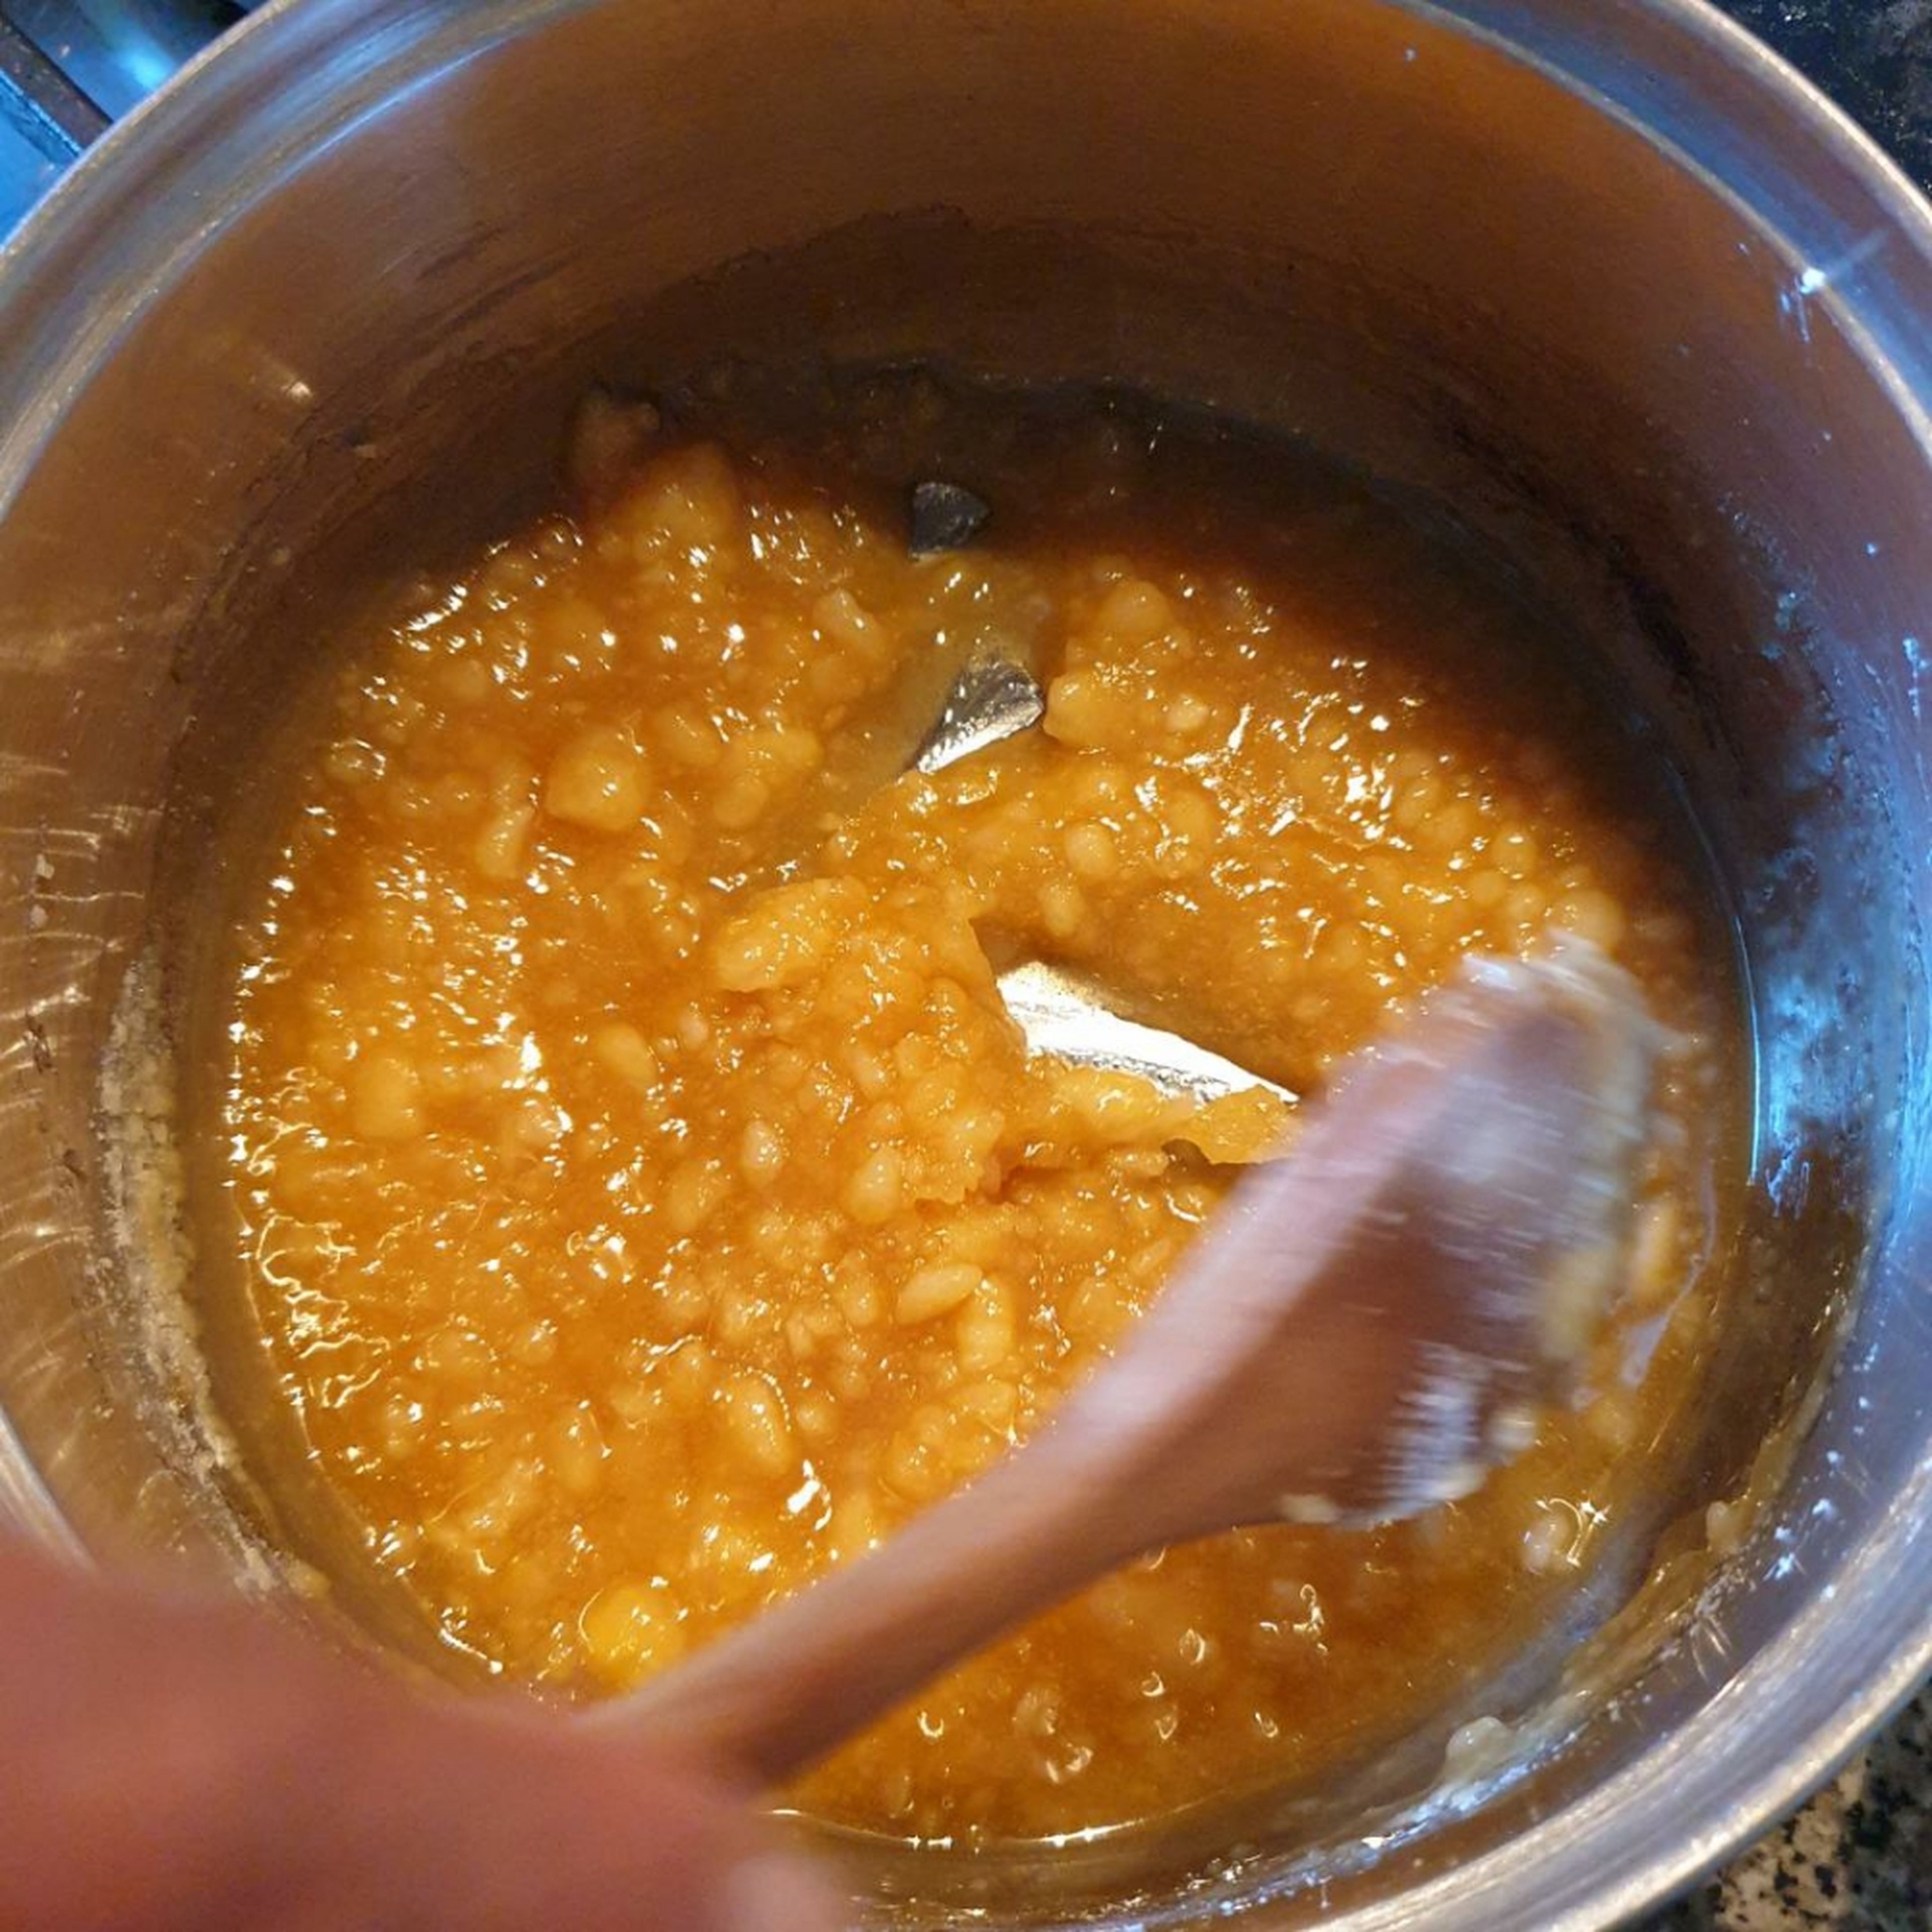 Caramelise the sugar: in a pan heat the sugar in medium heat. Continue stirring the sugar till it dissolves and turns to a brown colour ( should take approx. 10-15 minutes).